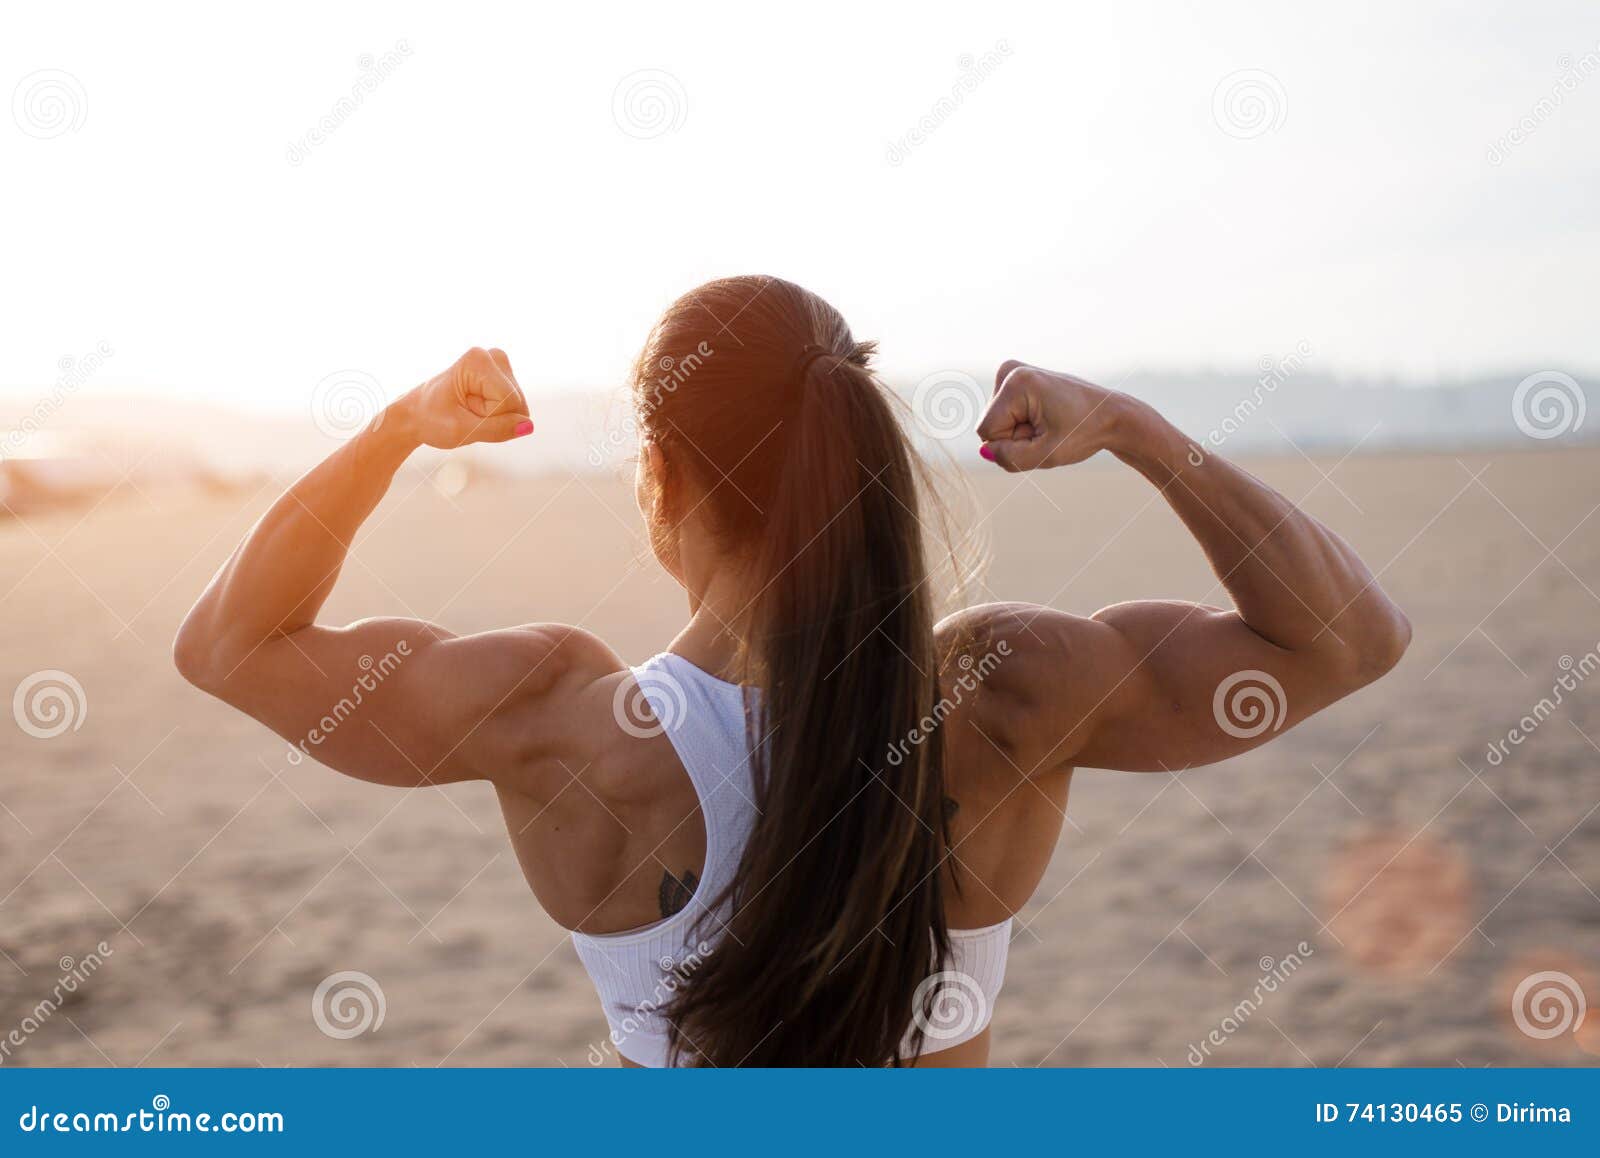 A Strong Girl With Big Muscular Arms On A Beach Stock Photo, Picture and  Royalty Free Image. Image 18043673.